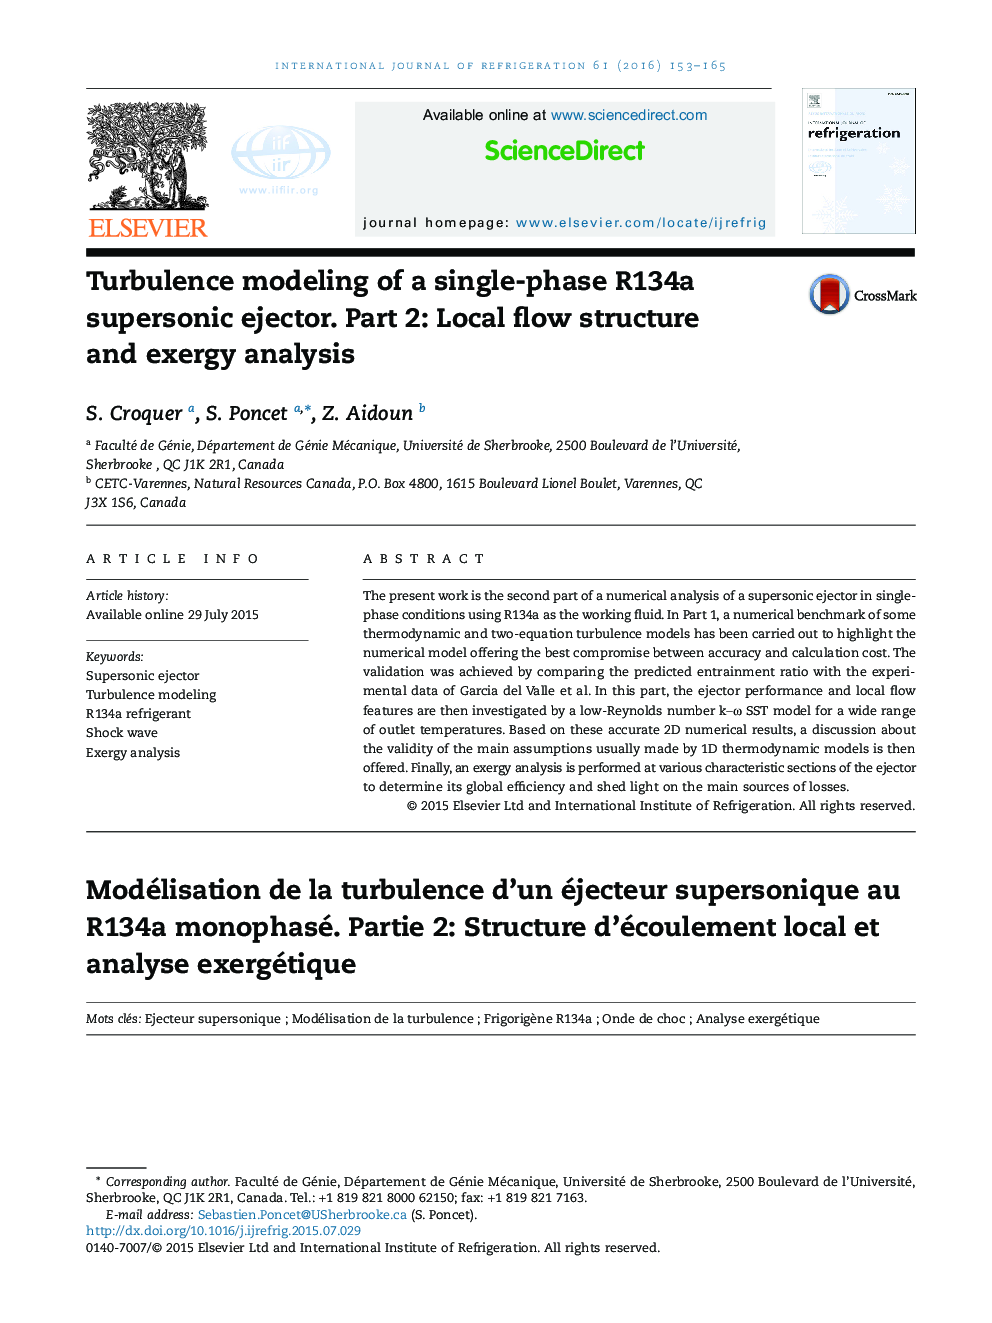 Turbulence modeling of a single-phase R134a supersonic ejector. Part 2: Local flow structure and exergy analysis